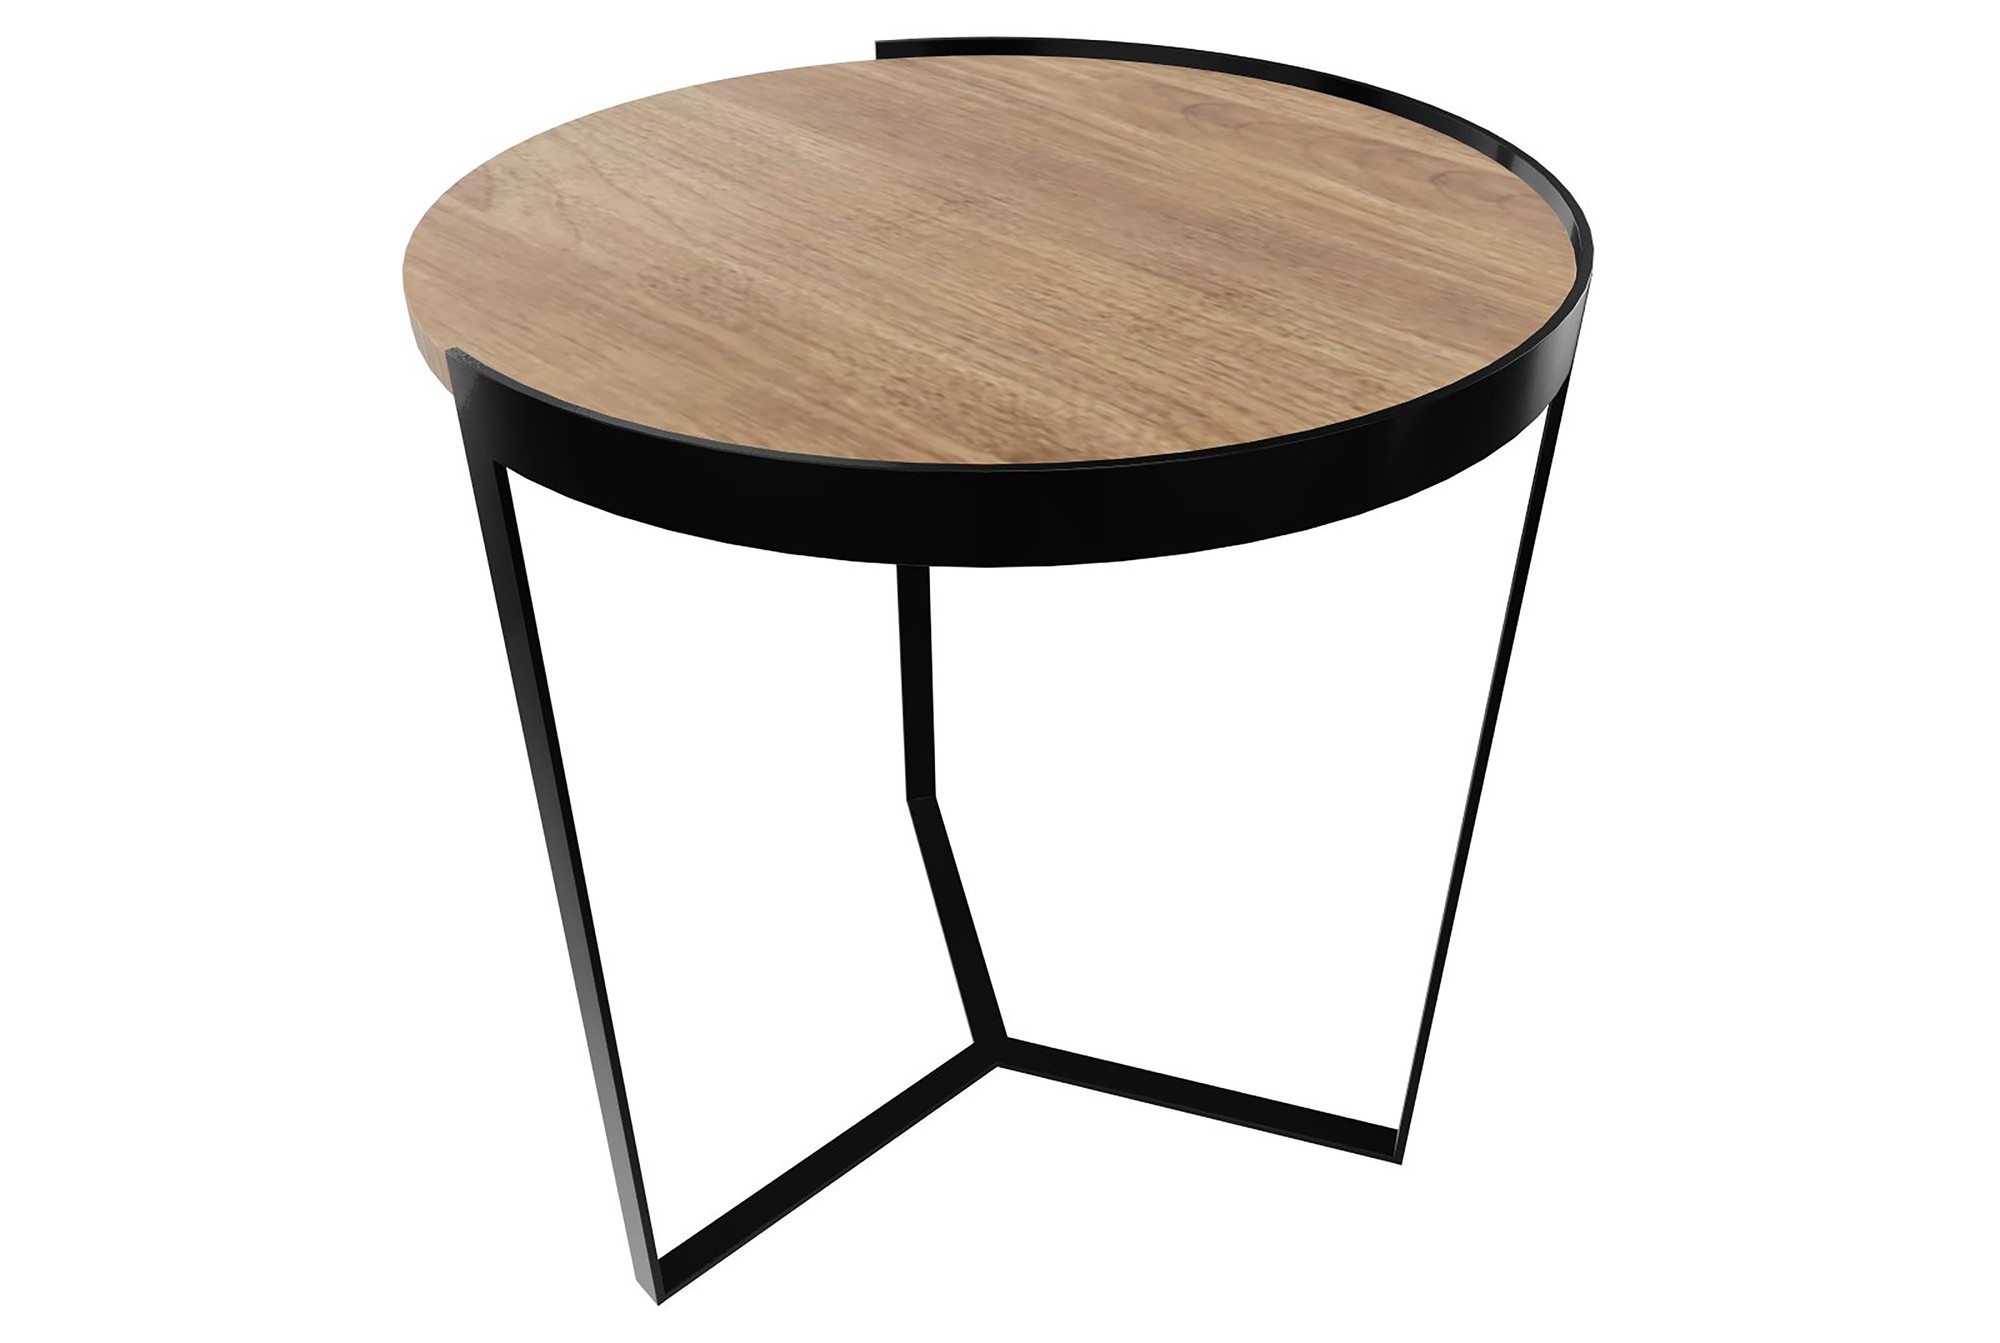 20 Contempo Brown and Black Round Wood Tri Leg End Table